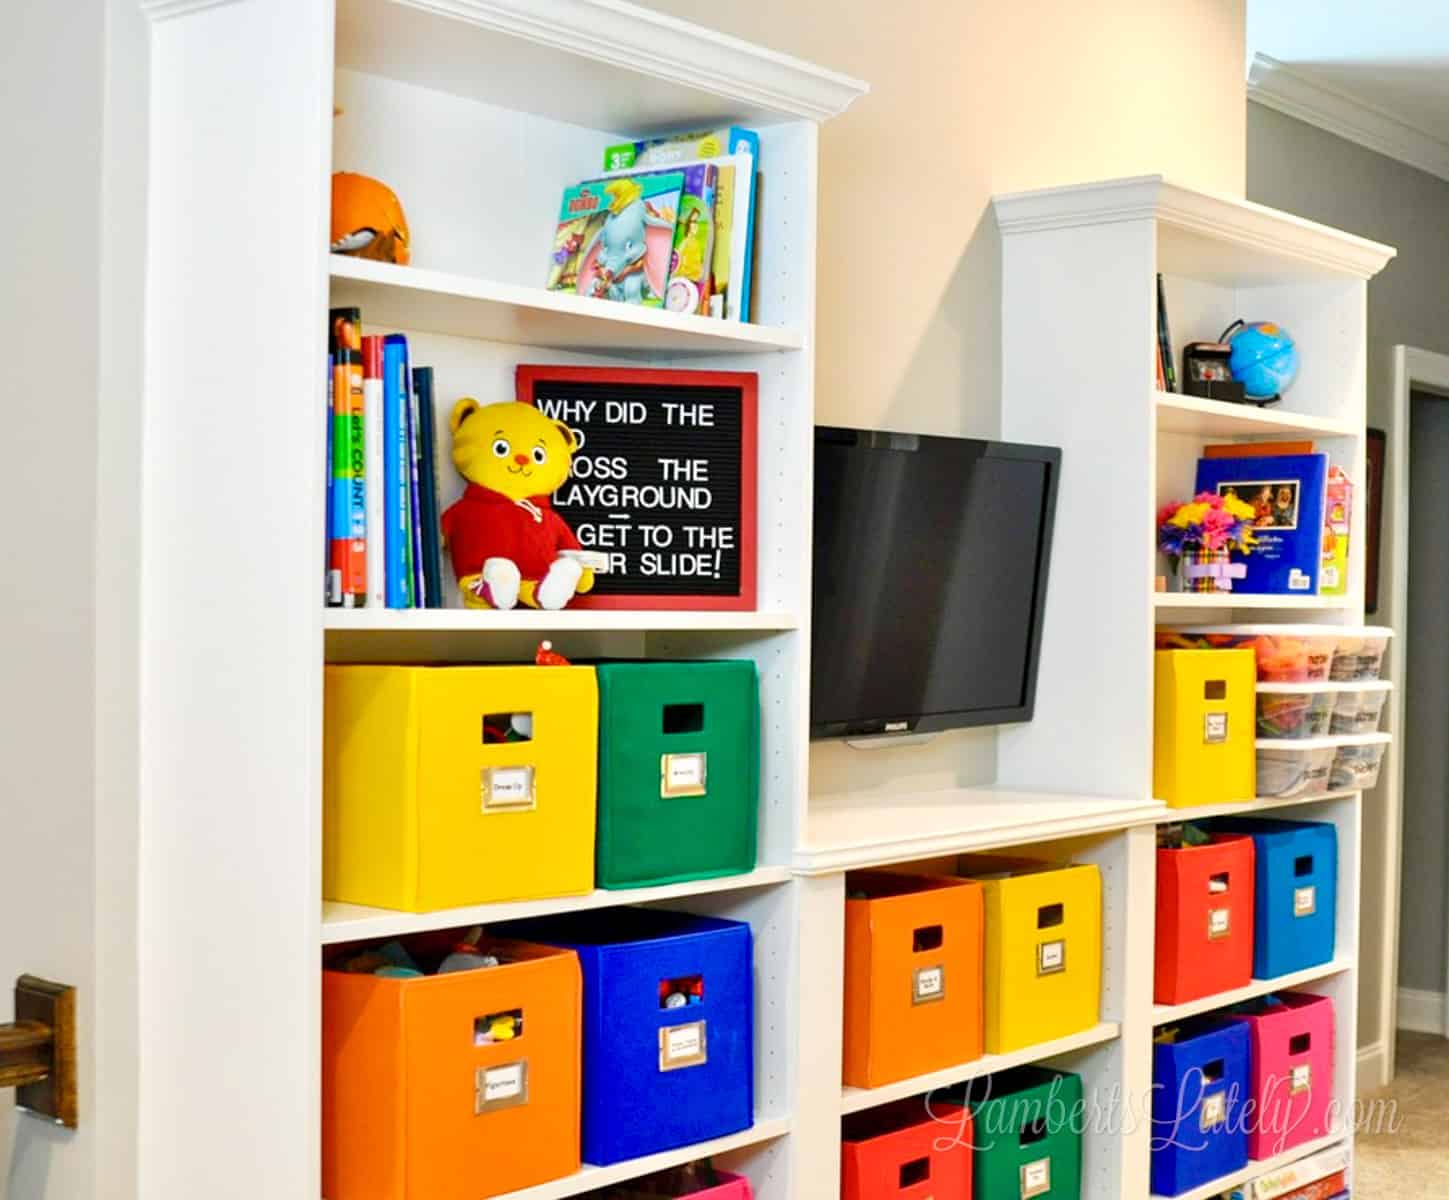 ikea billy bookcase built-ins with colorful bins in a playroom.